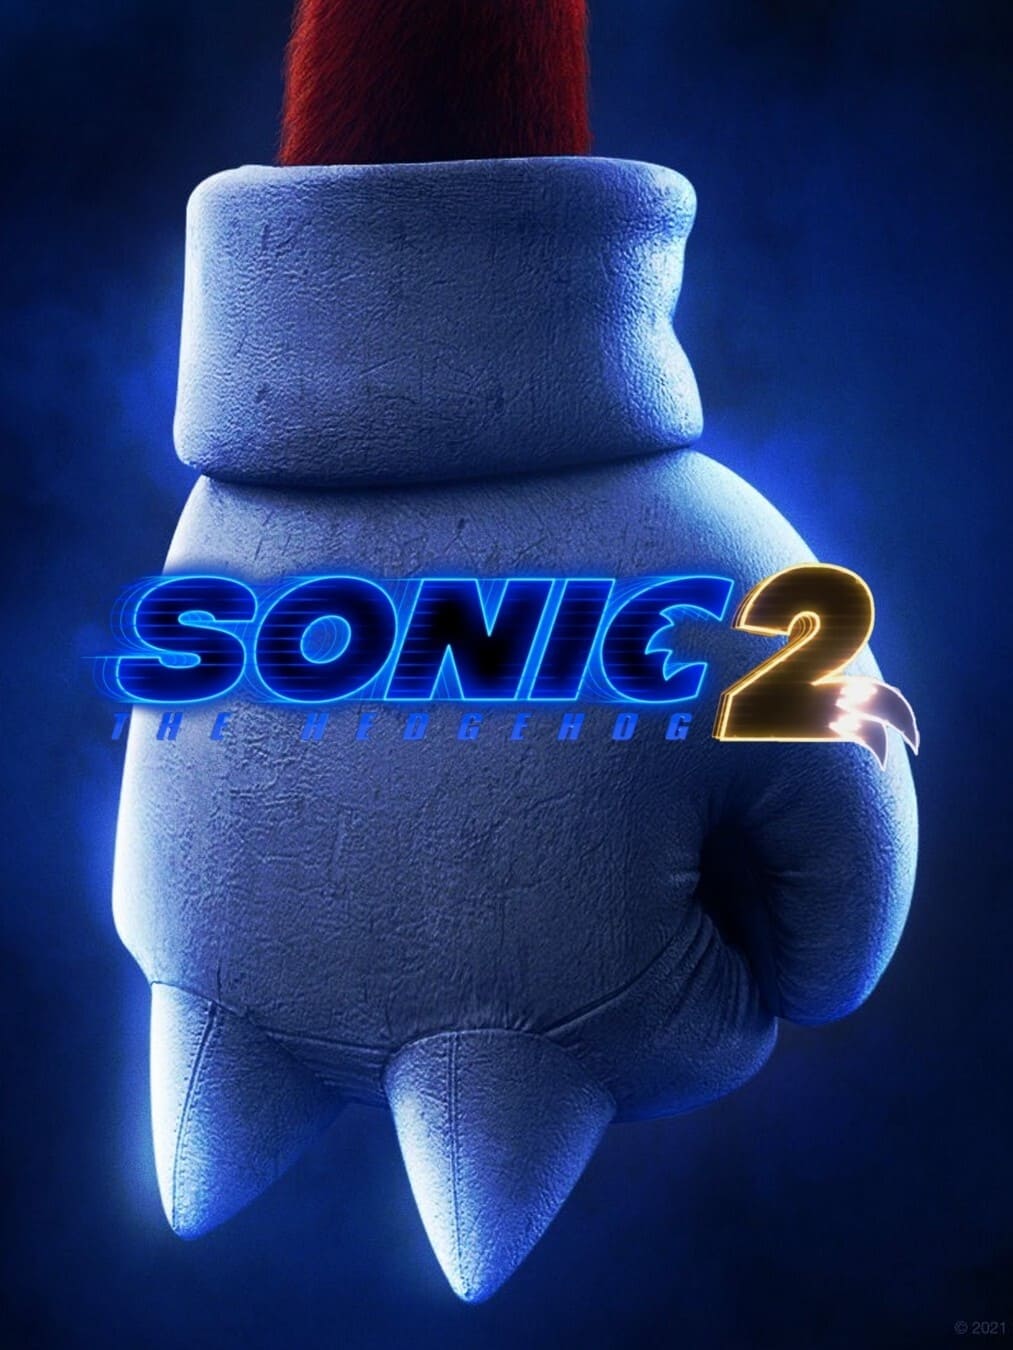 Poster for the movie "Sonic the Hedgehog 2"